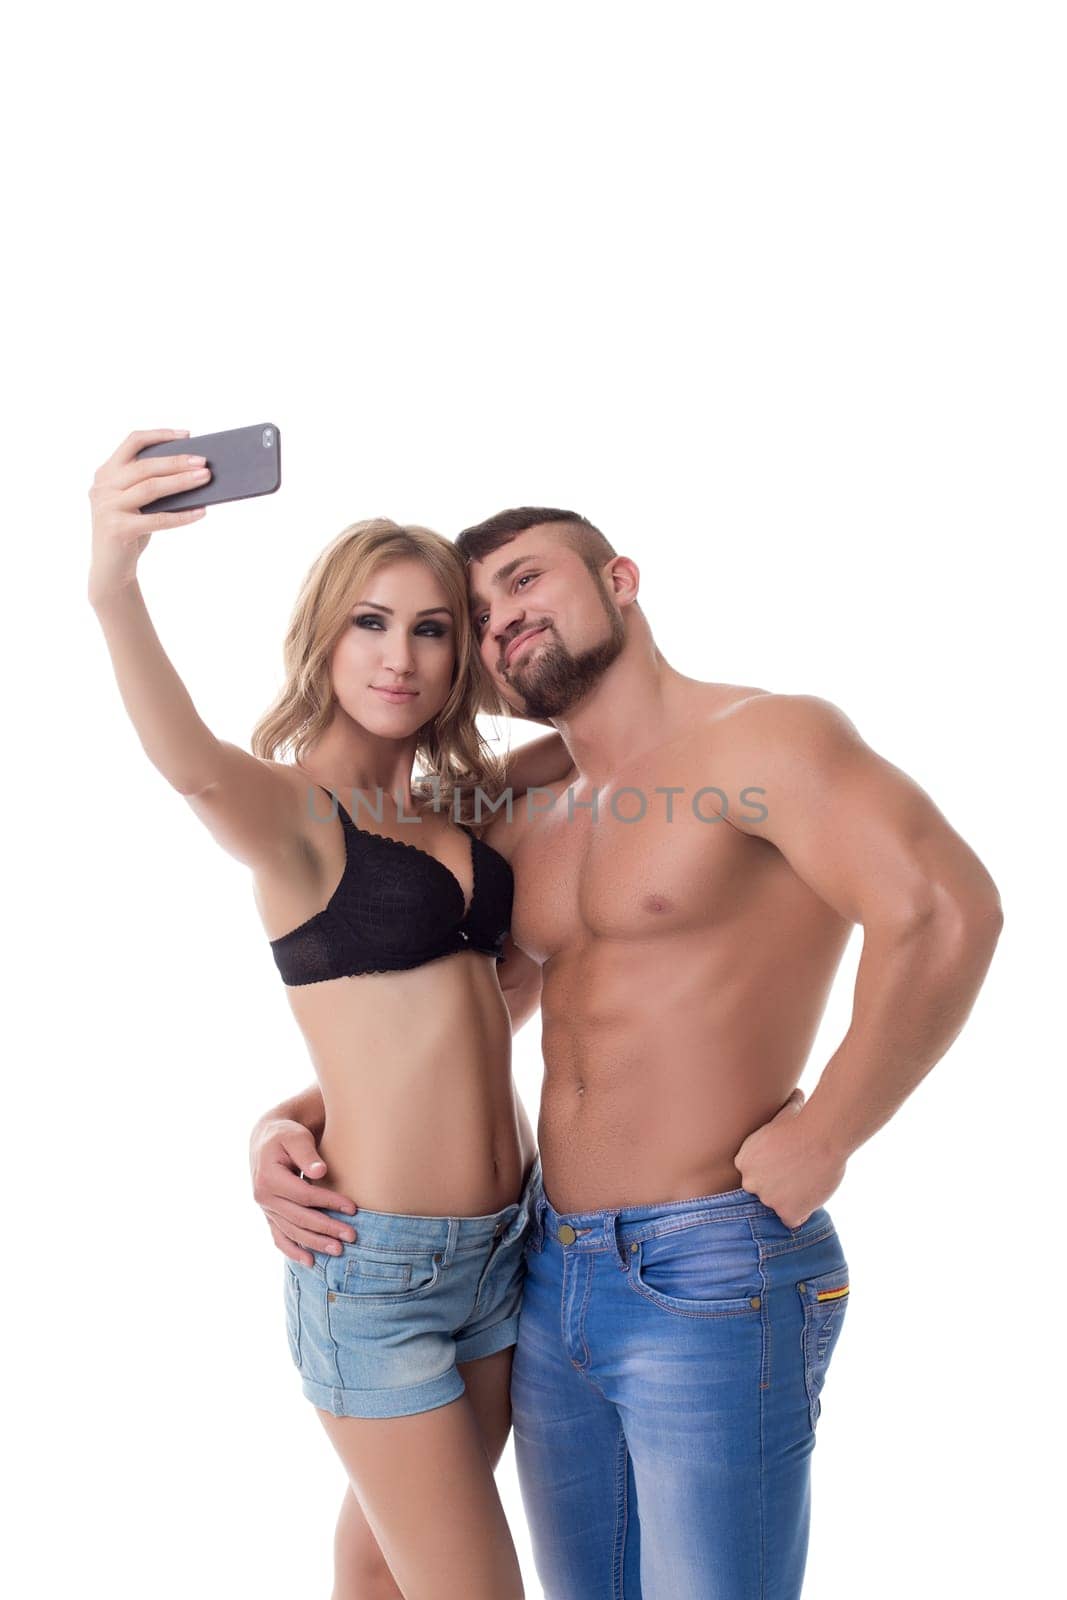 Cute couple athletes doing selfie on mobile phone. Isolated over white background